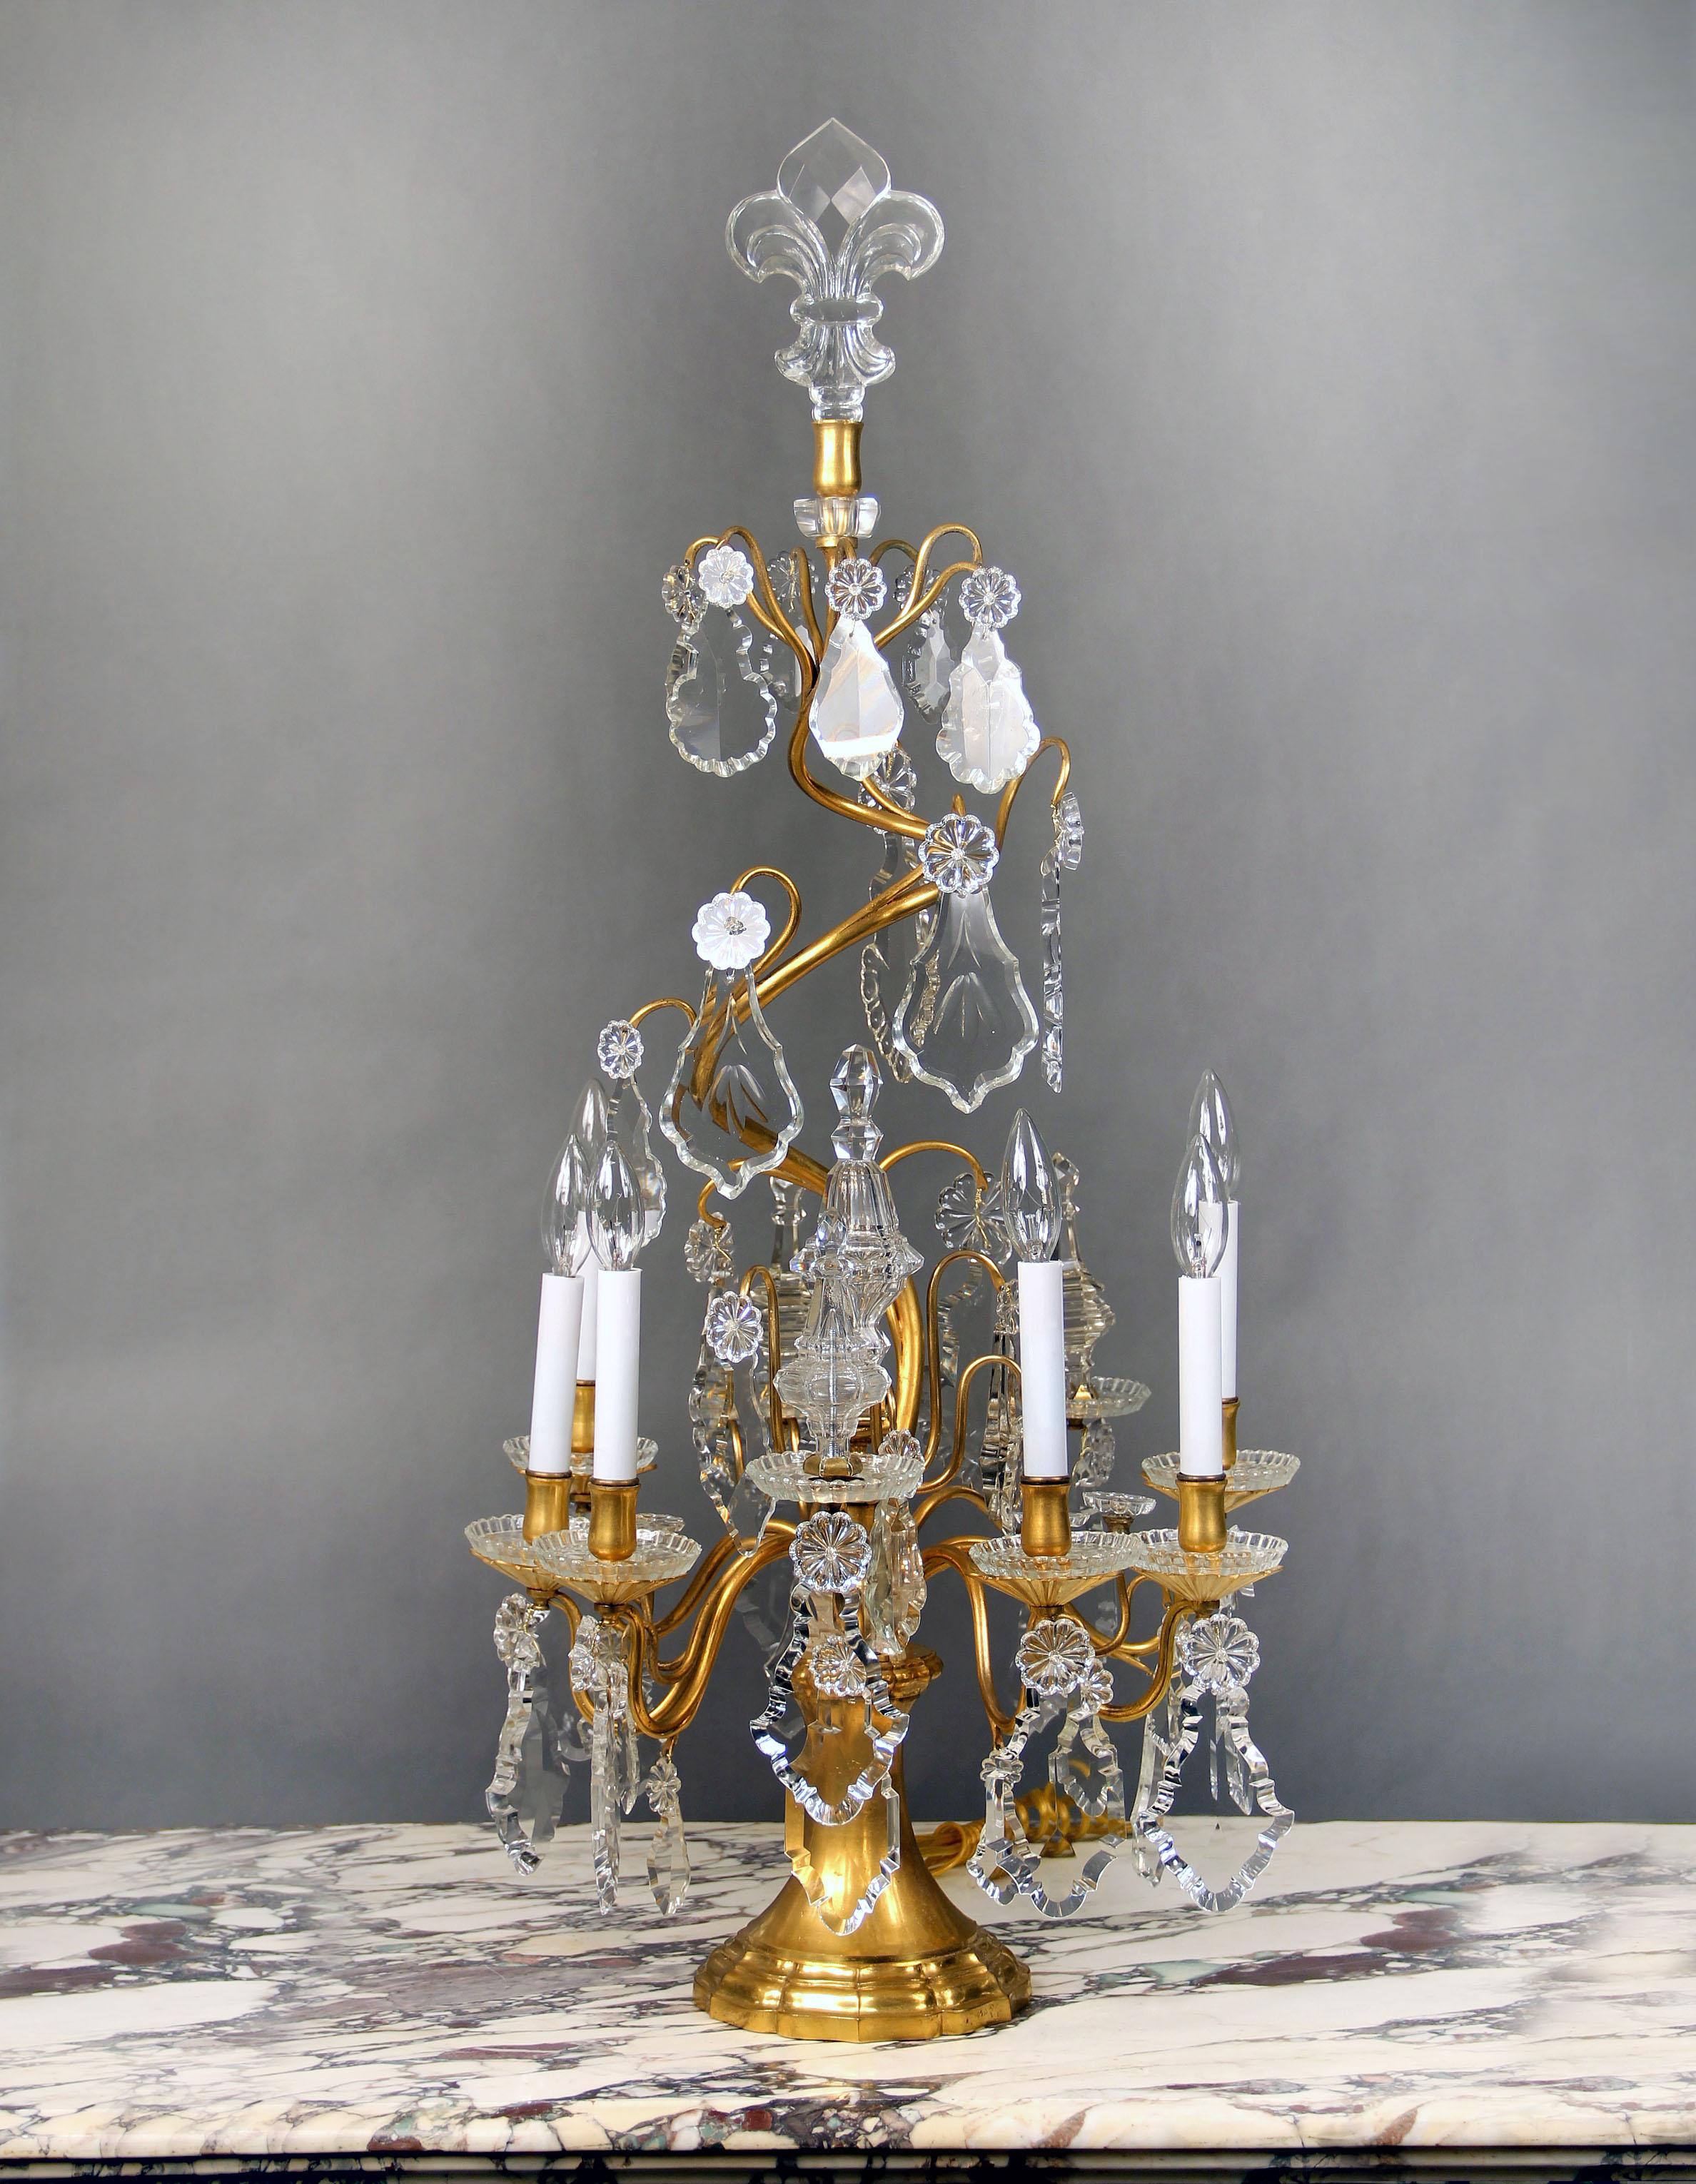 A Lovely Late 19th Century Gilt Bronze and Baccarat Crystal Six Light Girandole

Multi-faceted and shaped crystal, bronze spiral central column, four spears, six perimeter lights, bobeche cups, topped off with a crystal Fleur de lis.